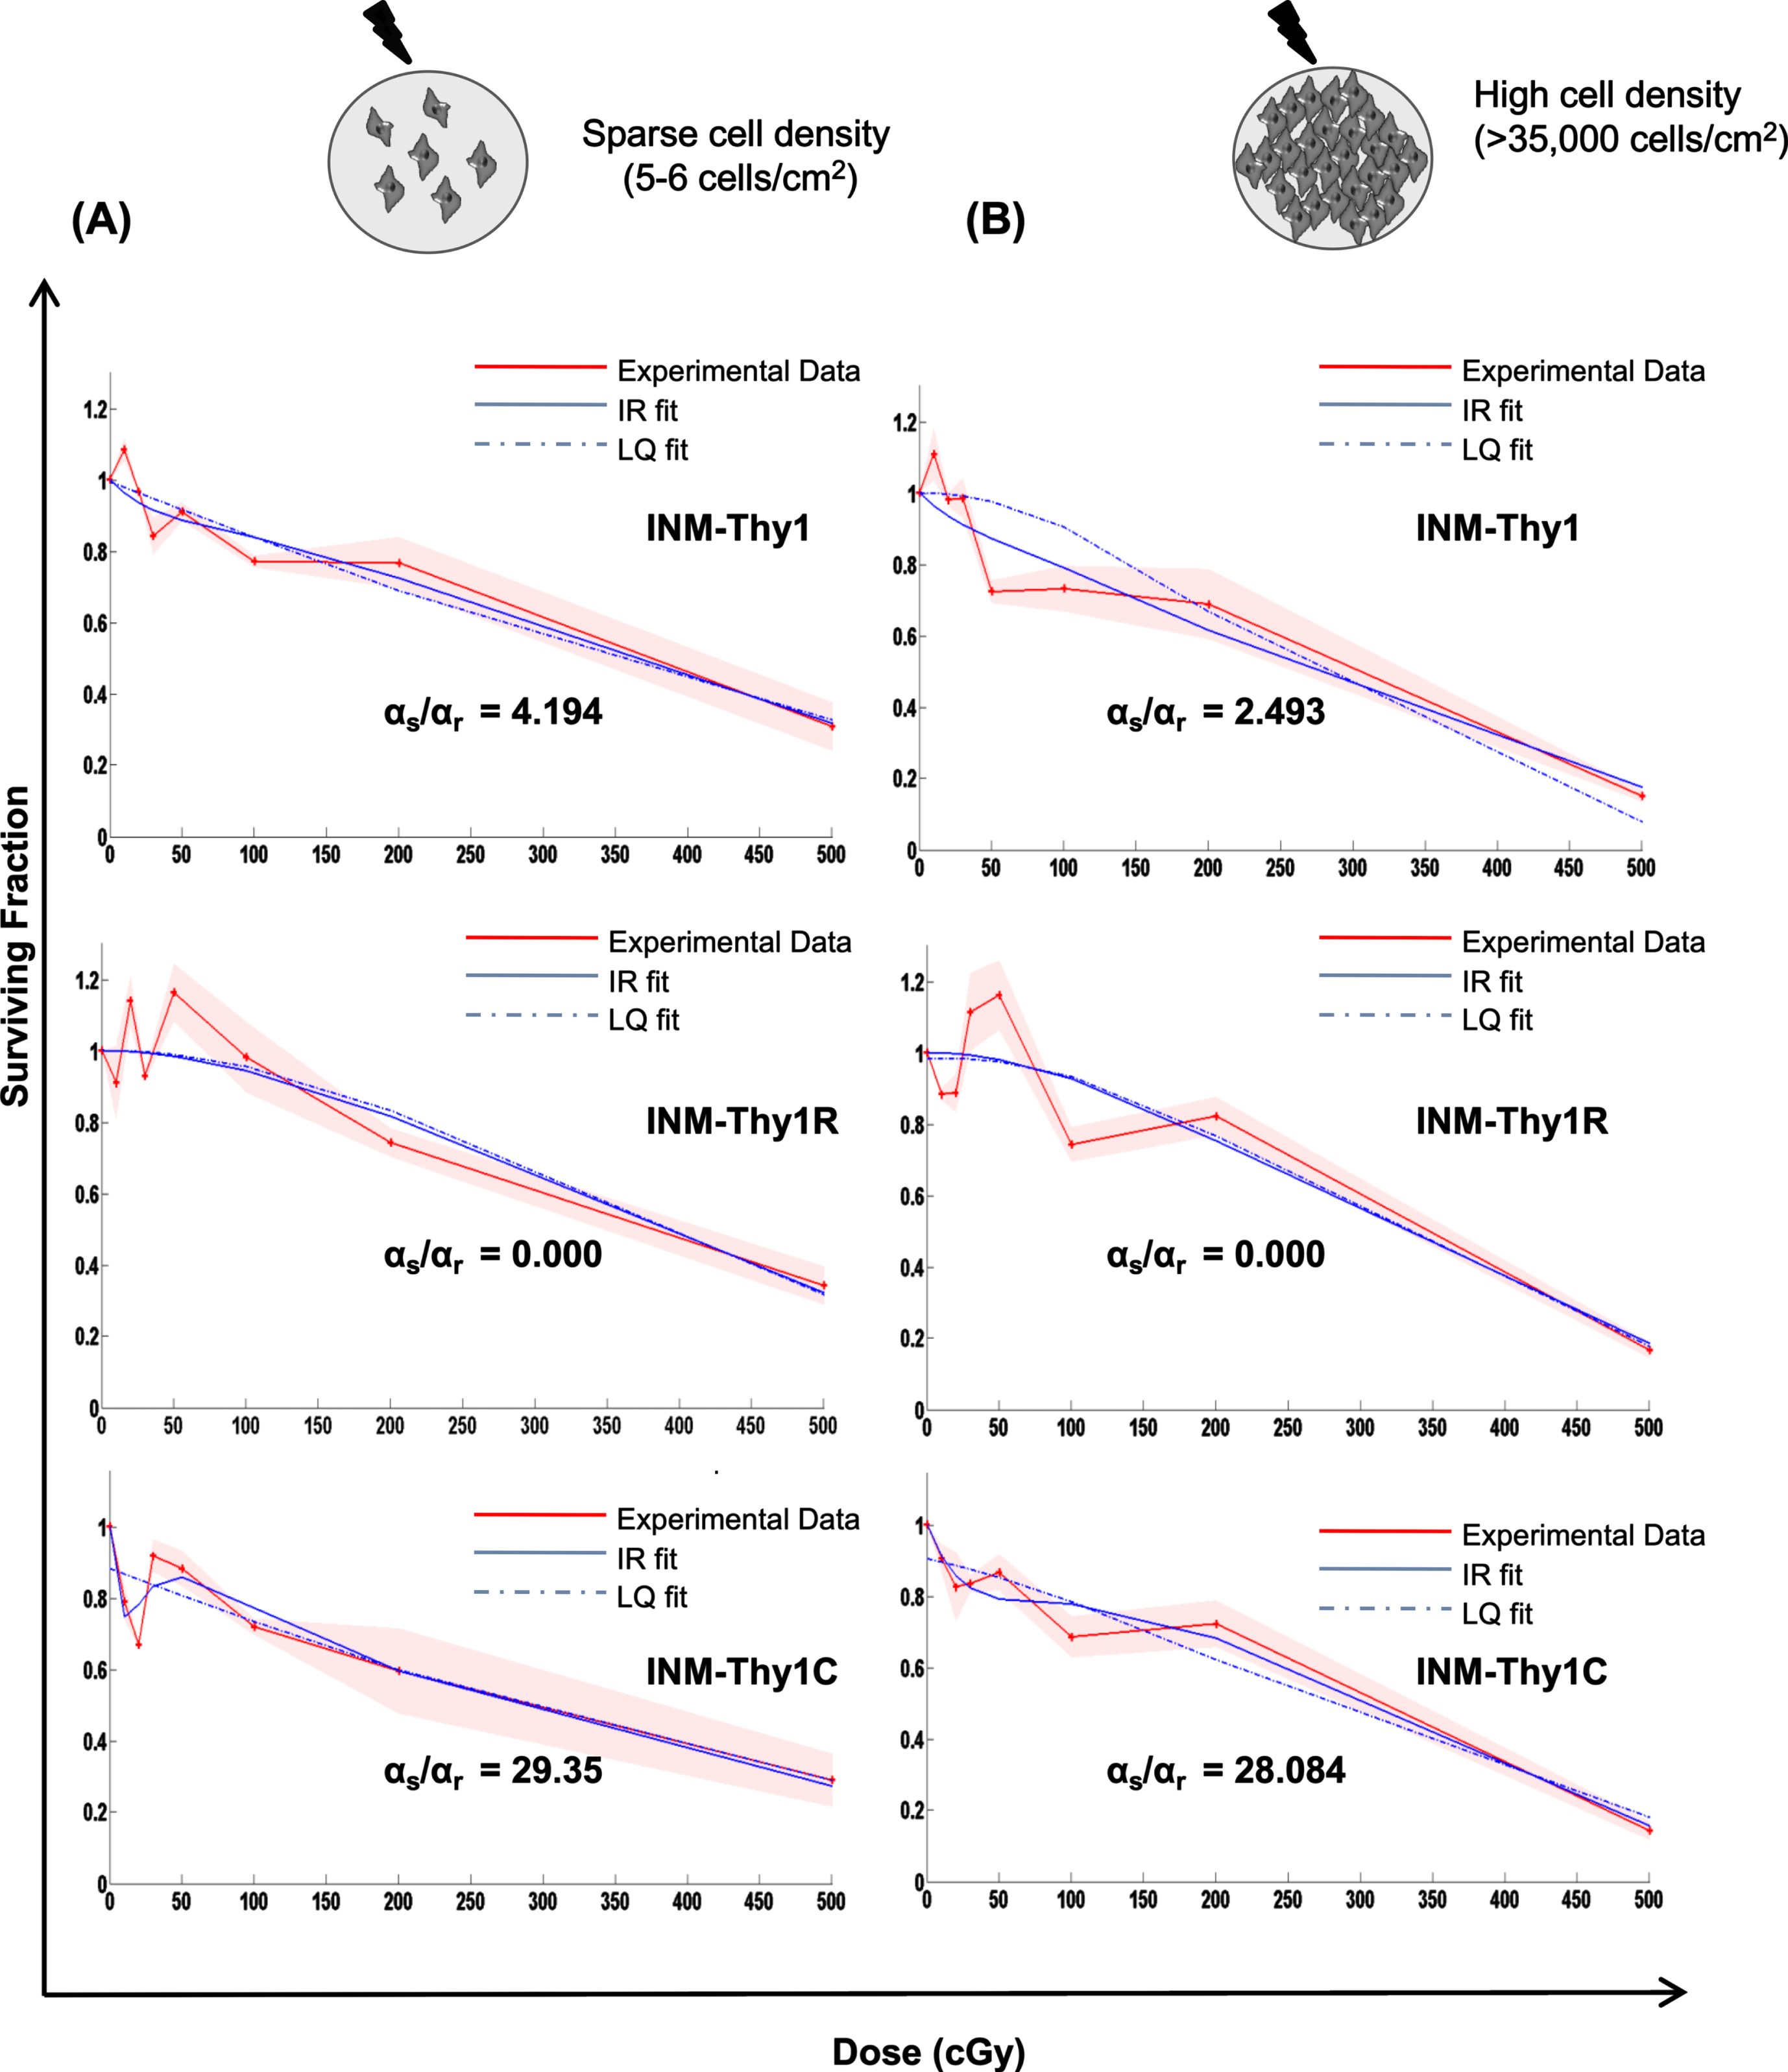 Low-dose radiation survival dose response under sparse cultures v/s high cell density: Clonogenic cell survival dose response of the parental INM-Thy1 and transformed strains (INM-Thy1R and INM-Thy1C), when cells were plated at low (a) and high (b) cell density. The survival curve was fitted to the LQ (dotted blue line) and IR (smooth blue line) models, along with the experimental data (smooth red line), the respective αs and αr values are shown. Each data point is the mean of nine observations from three independent experiments, and the color shade represents standard deviation.